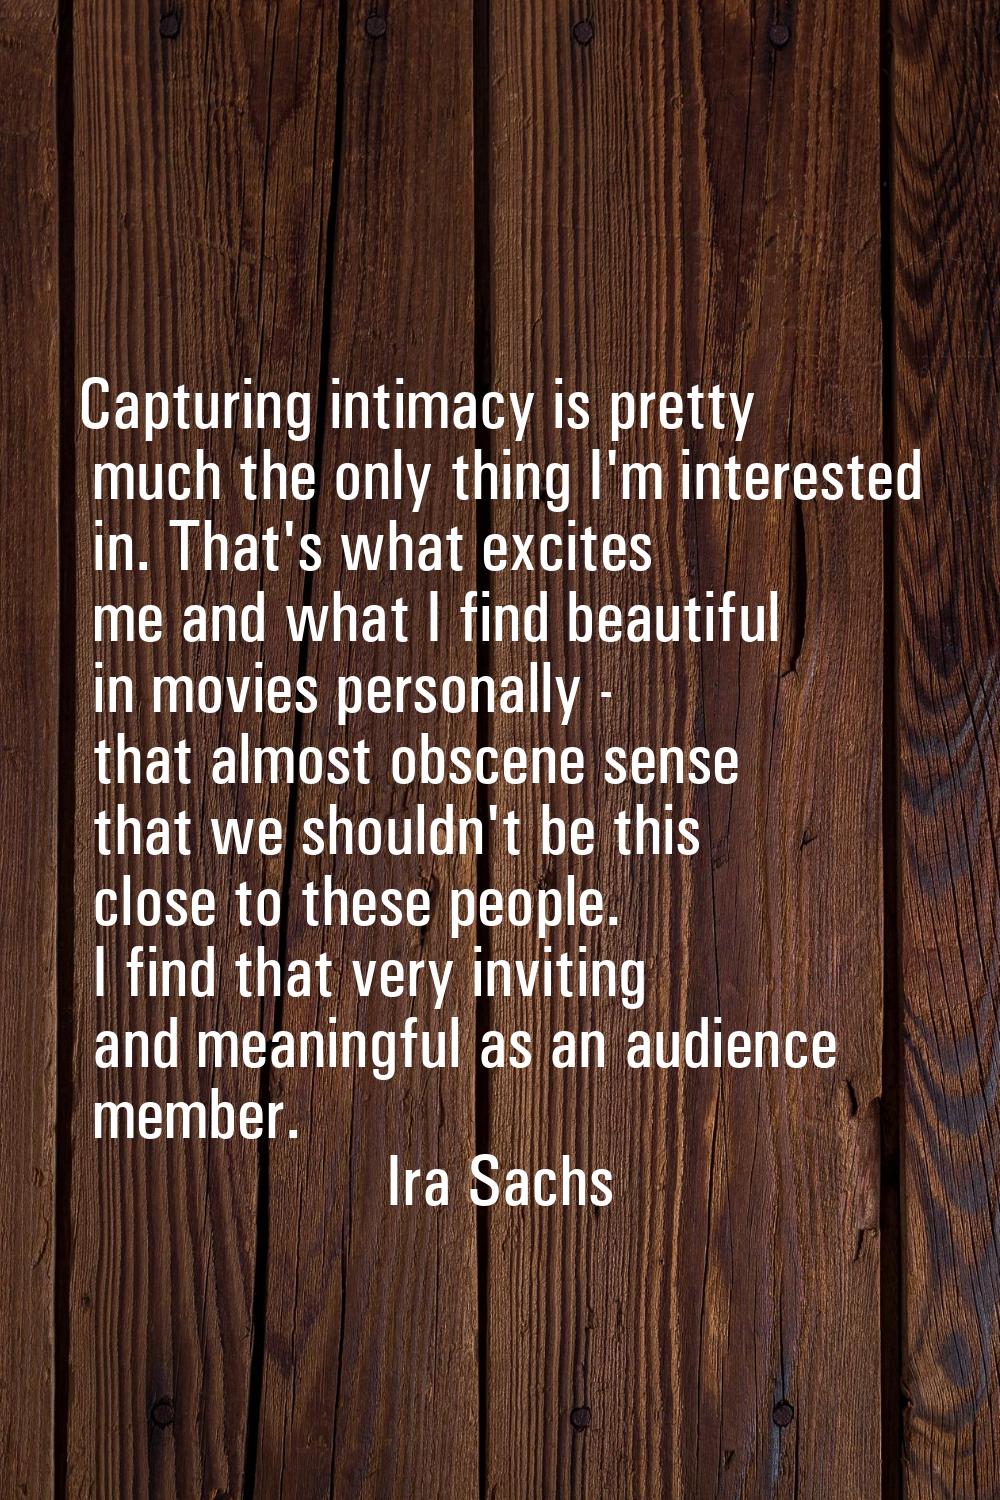 Capturing intimacy is pretty much the only thing I'm interested in. That's what excites me and what